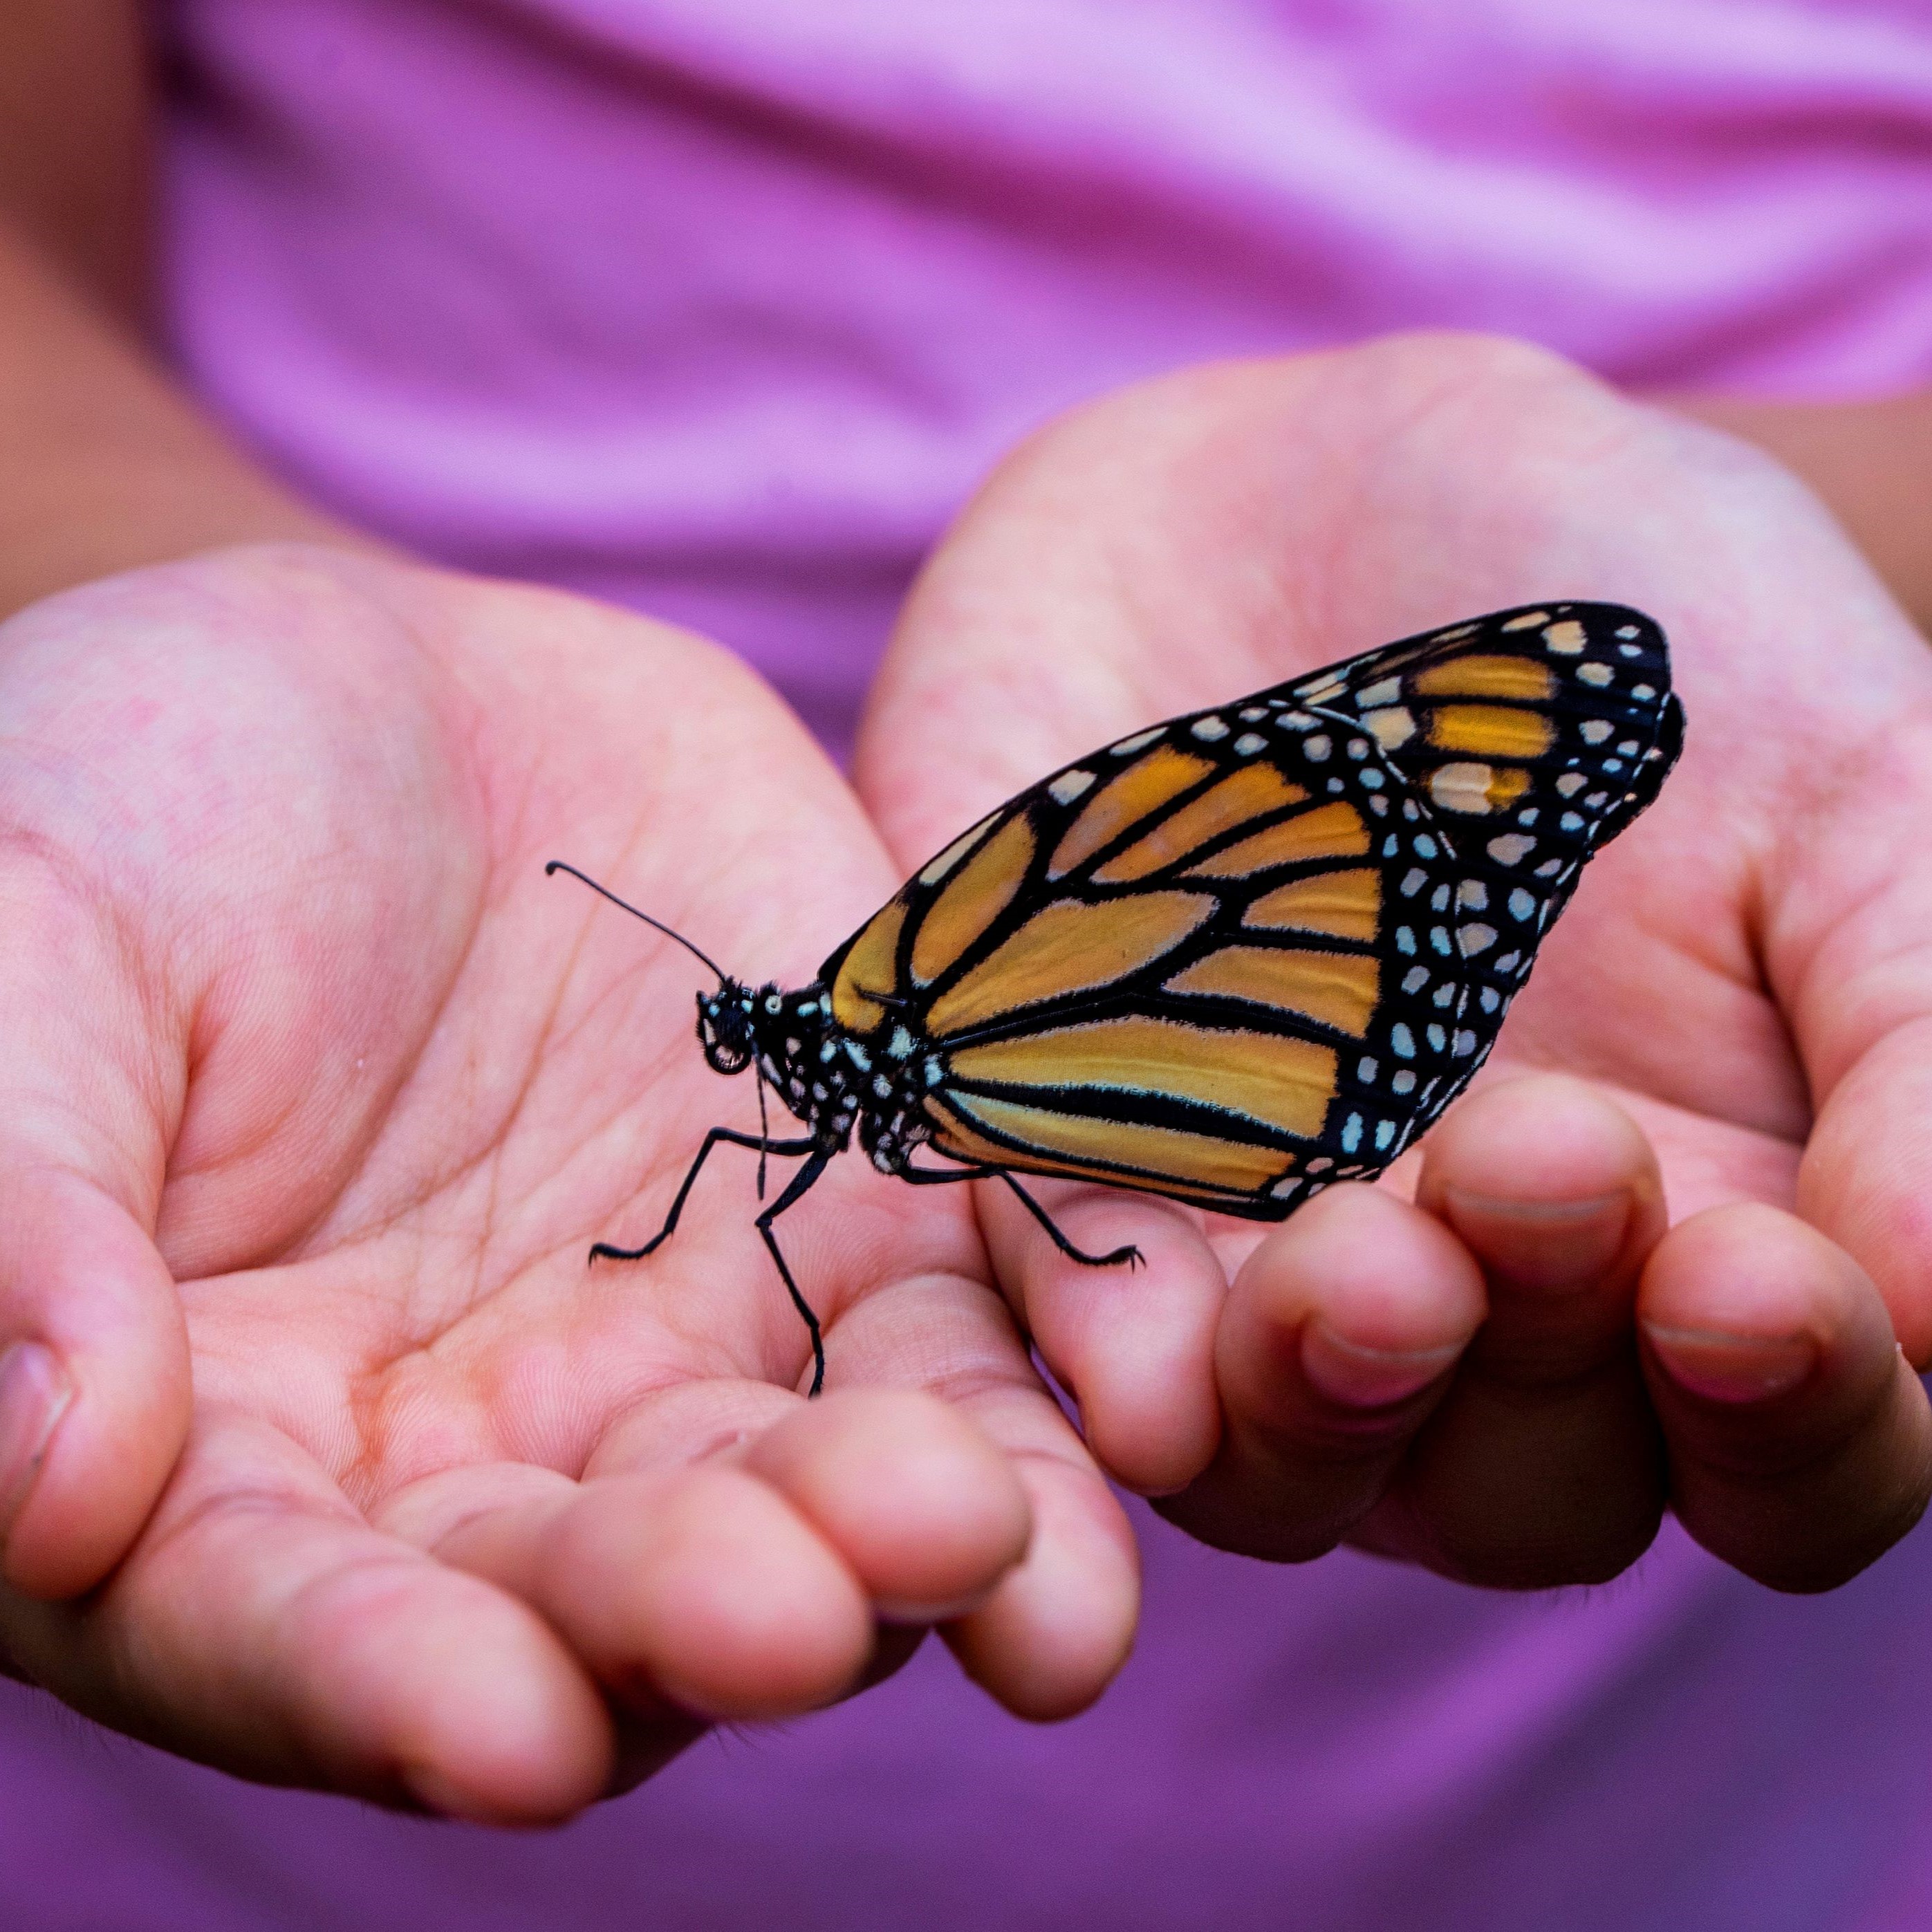 A child holding a butterfly.